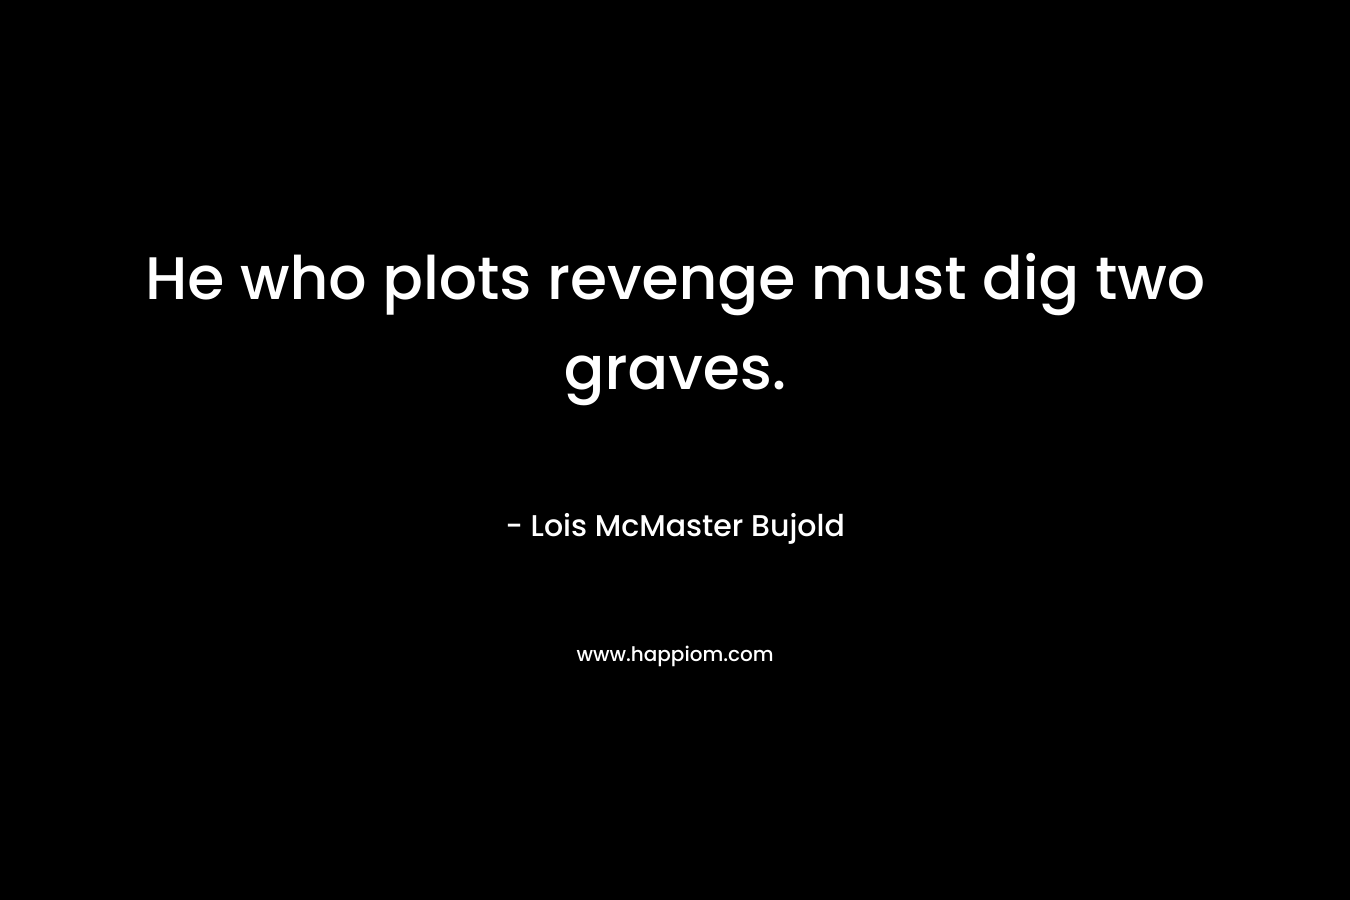 He who plots revenge must dig two graves. – Lois McMaster Bujold